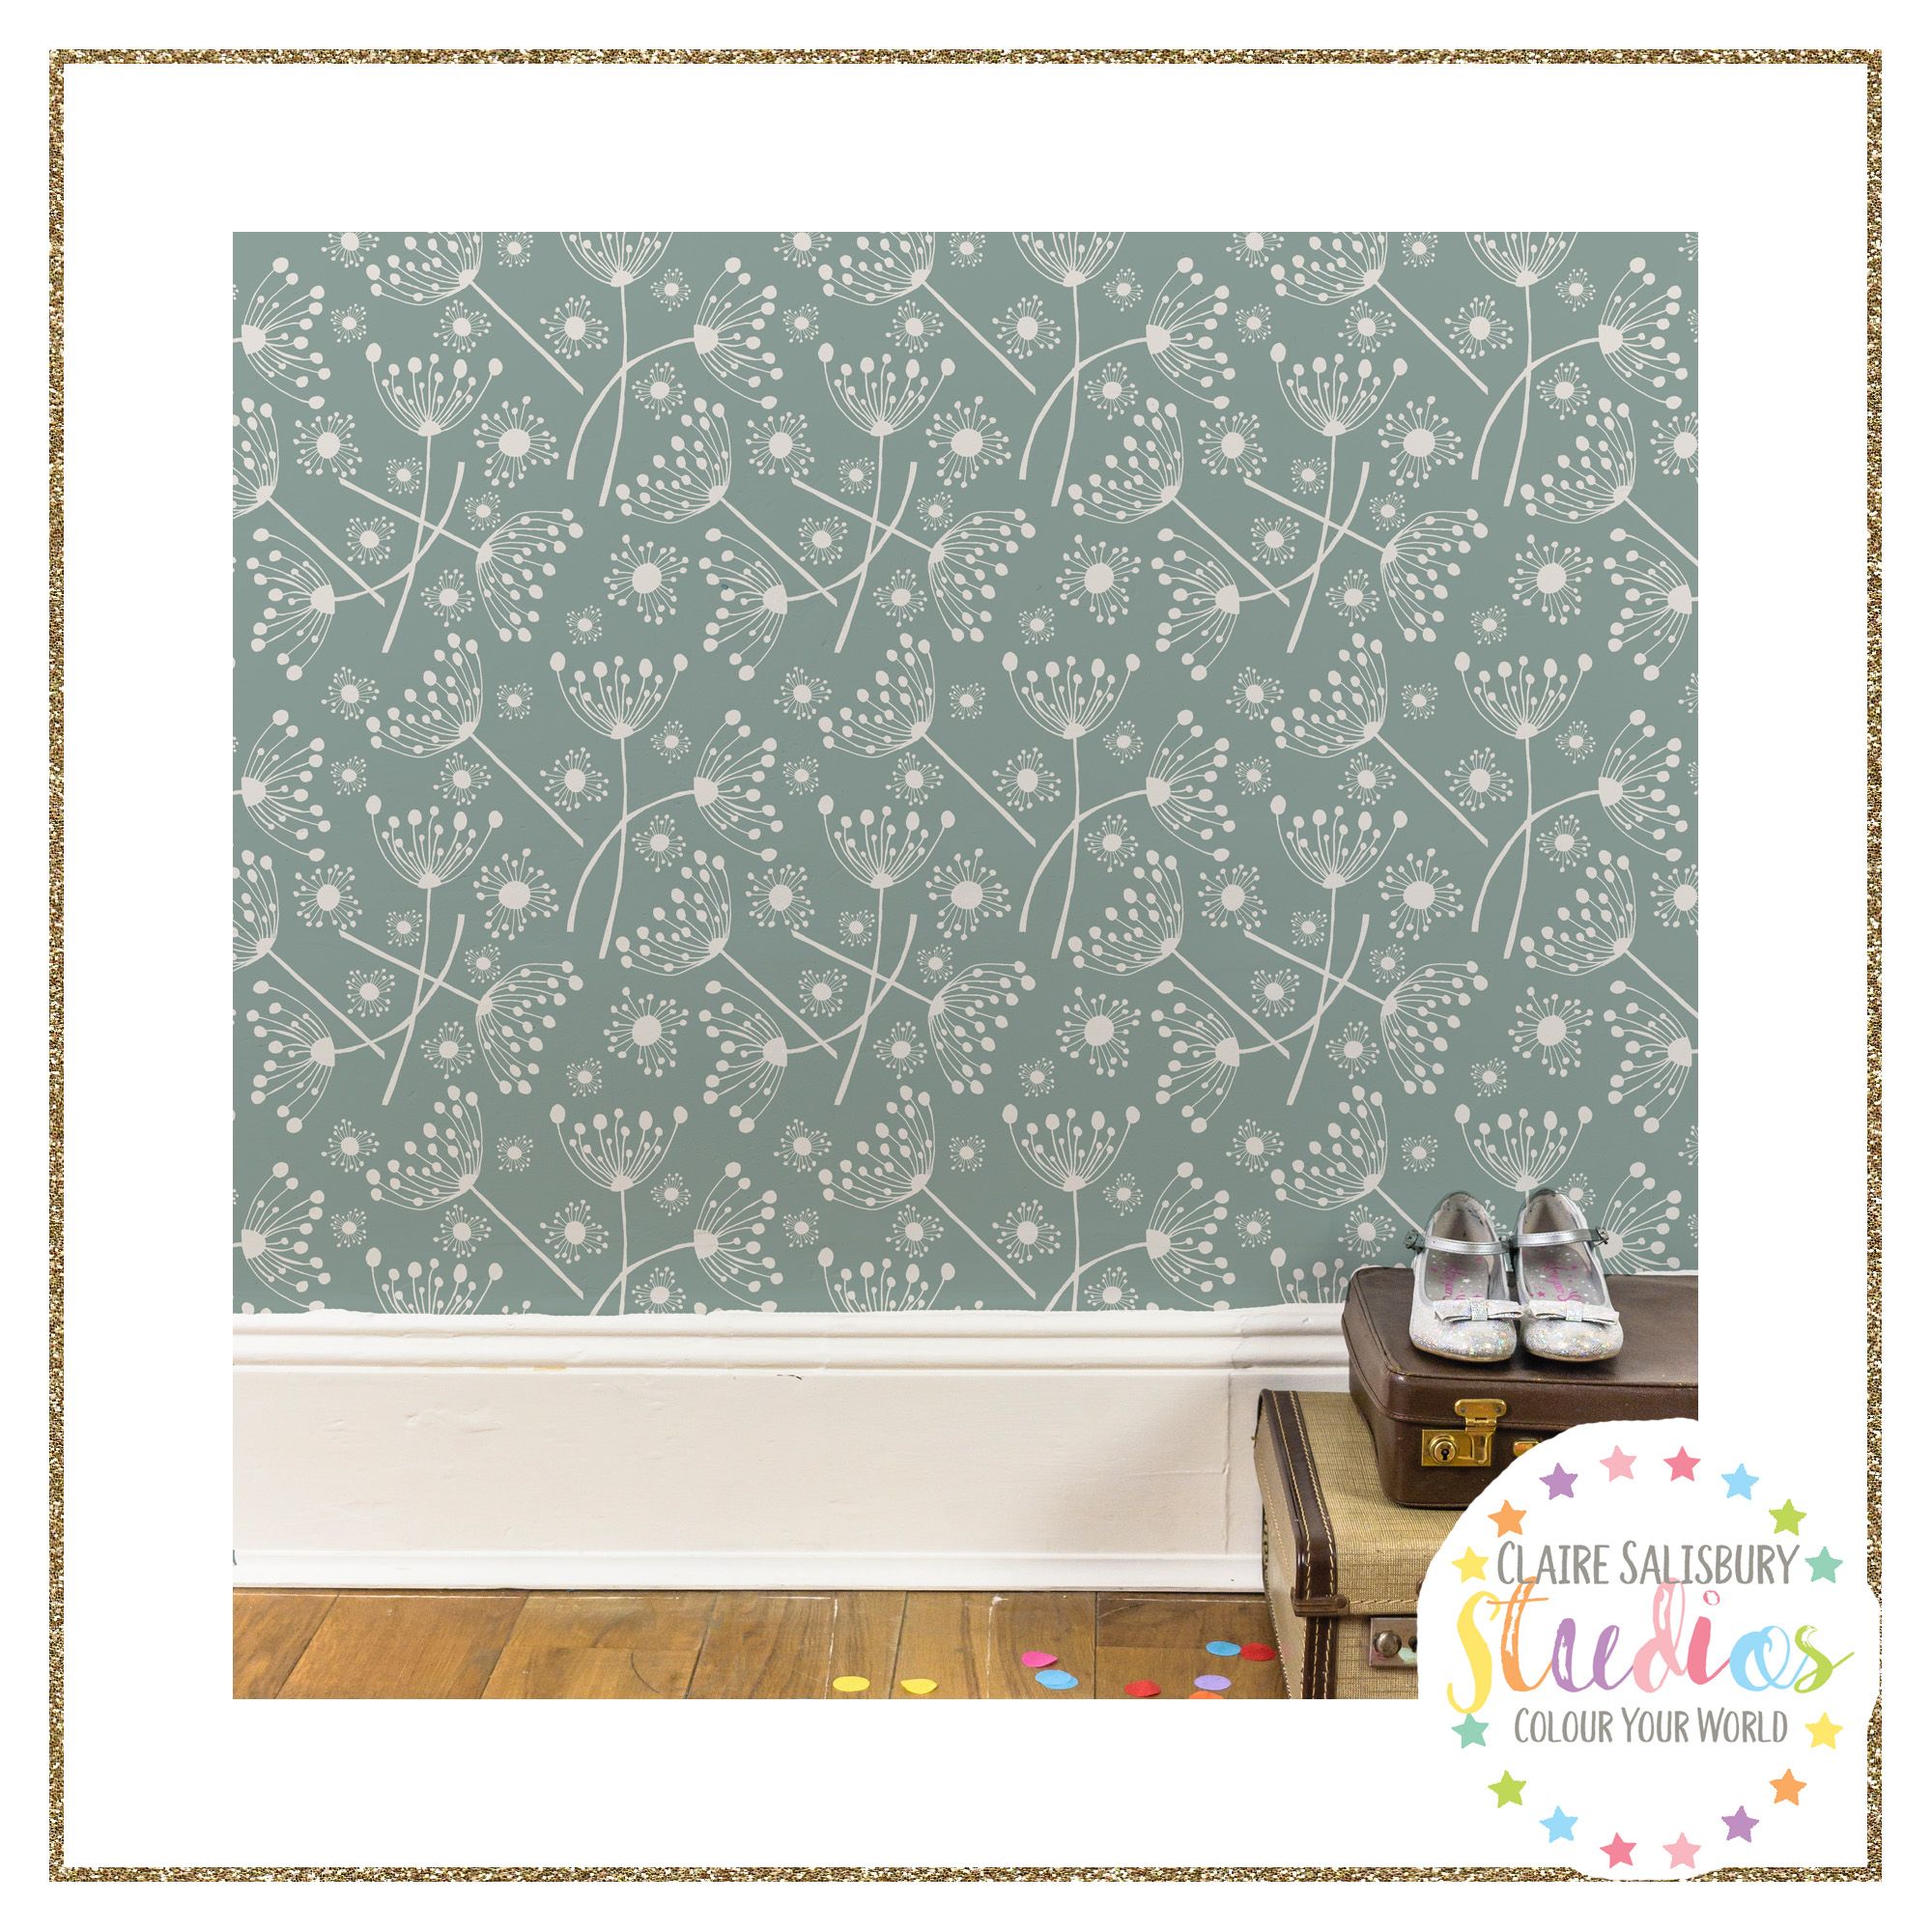 CRAFTED HERITAGE SURFACE PATTERN COLLECTION - FLORAL DAY DREAM PATTERN - DANDELION CLOCKS & COW PARSLEY